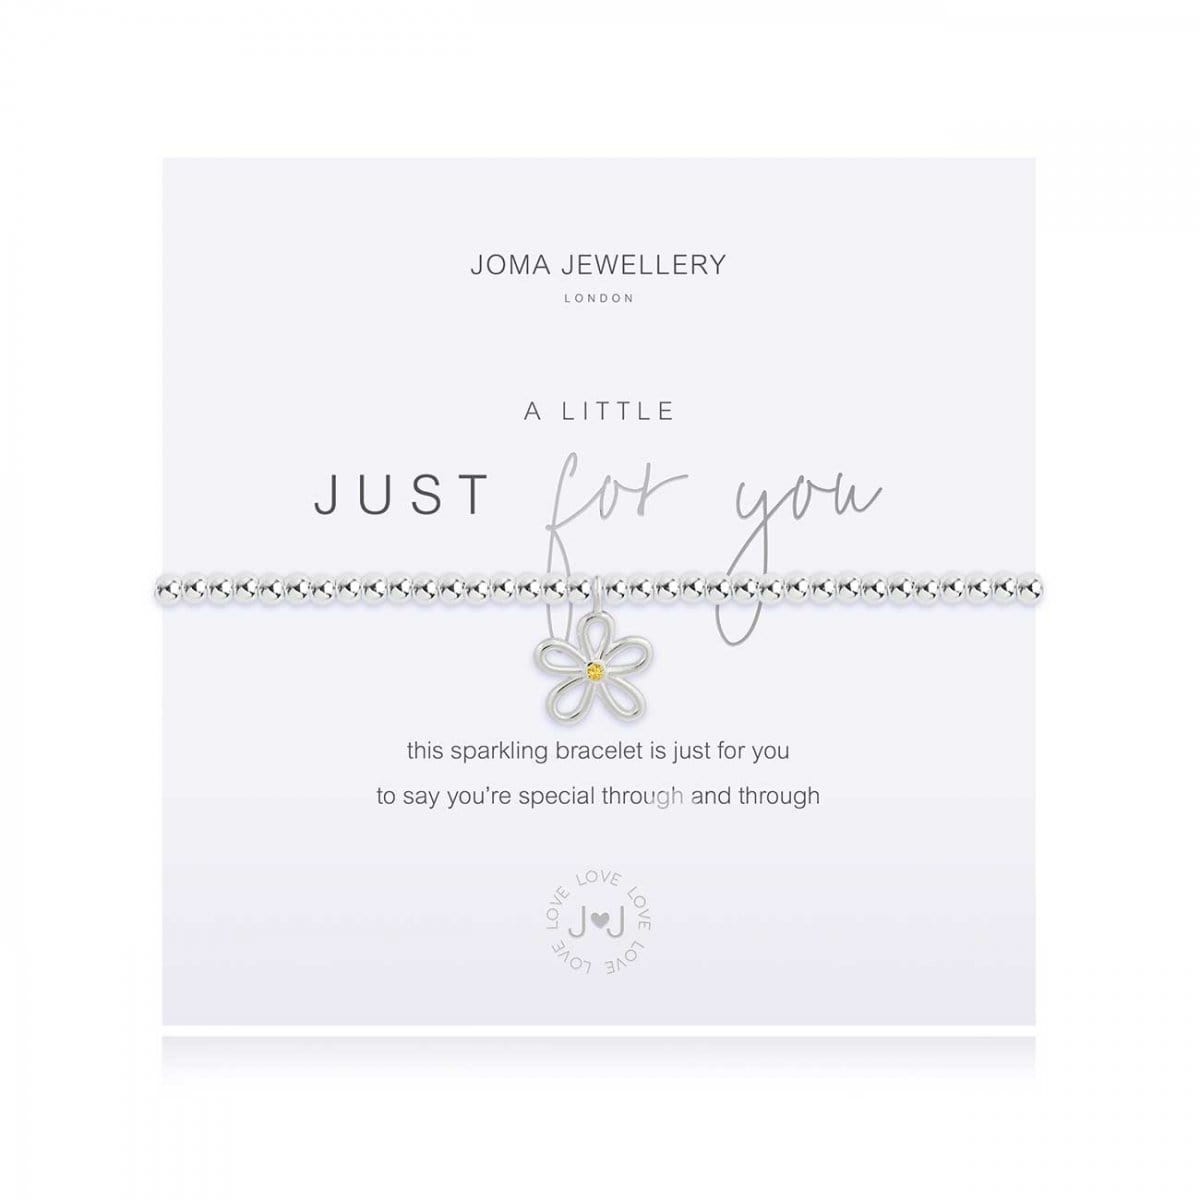 Joma Jewellery Bracelet Joma Jewellery Bracelet - a little Just For You